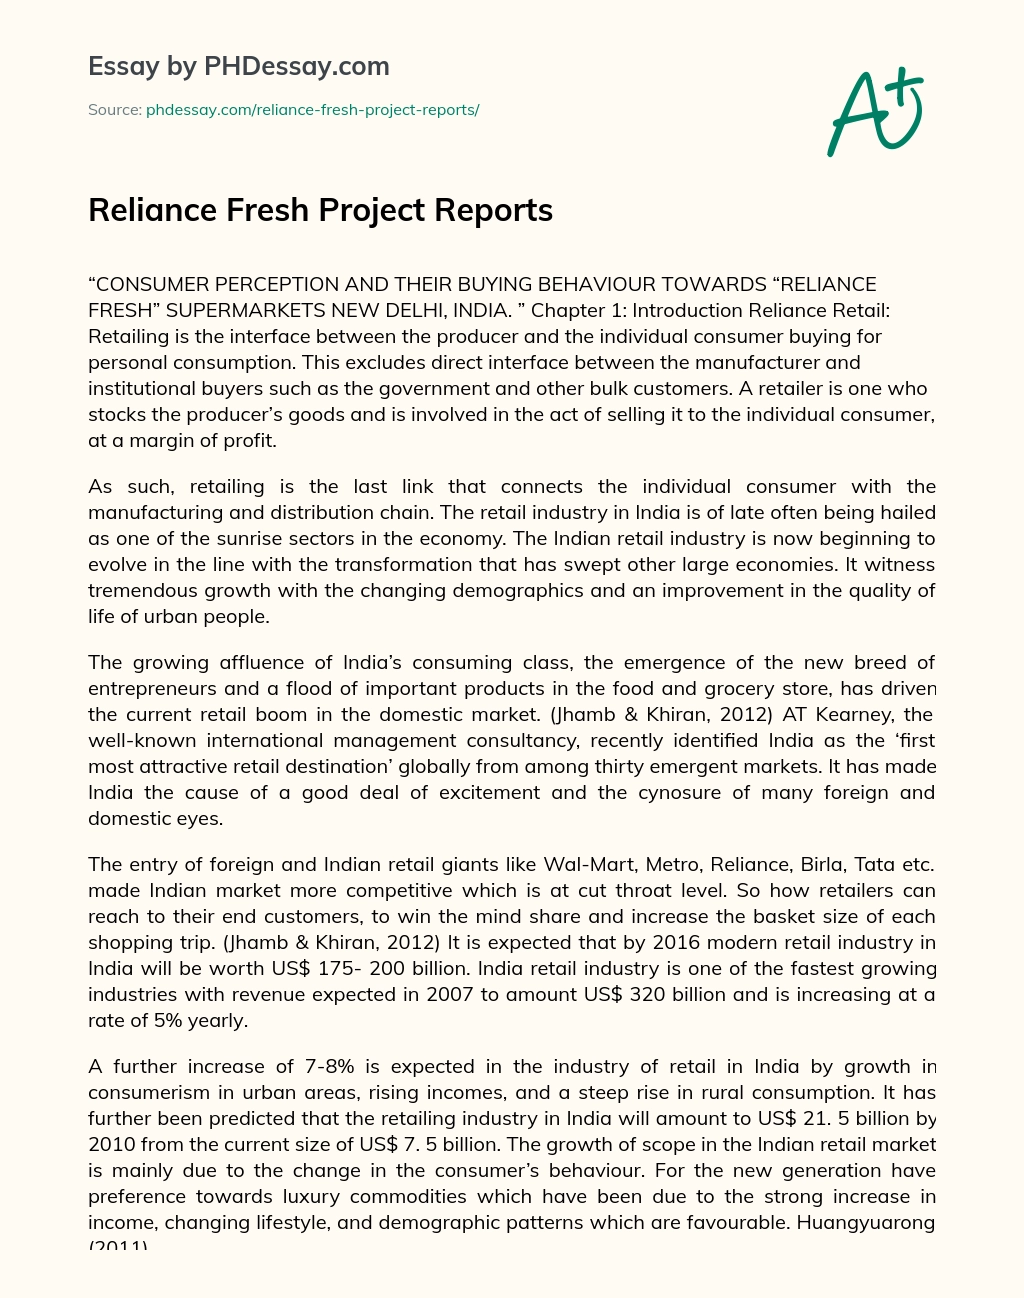 Reliance Fresh Project Reports essay